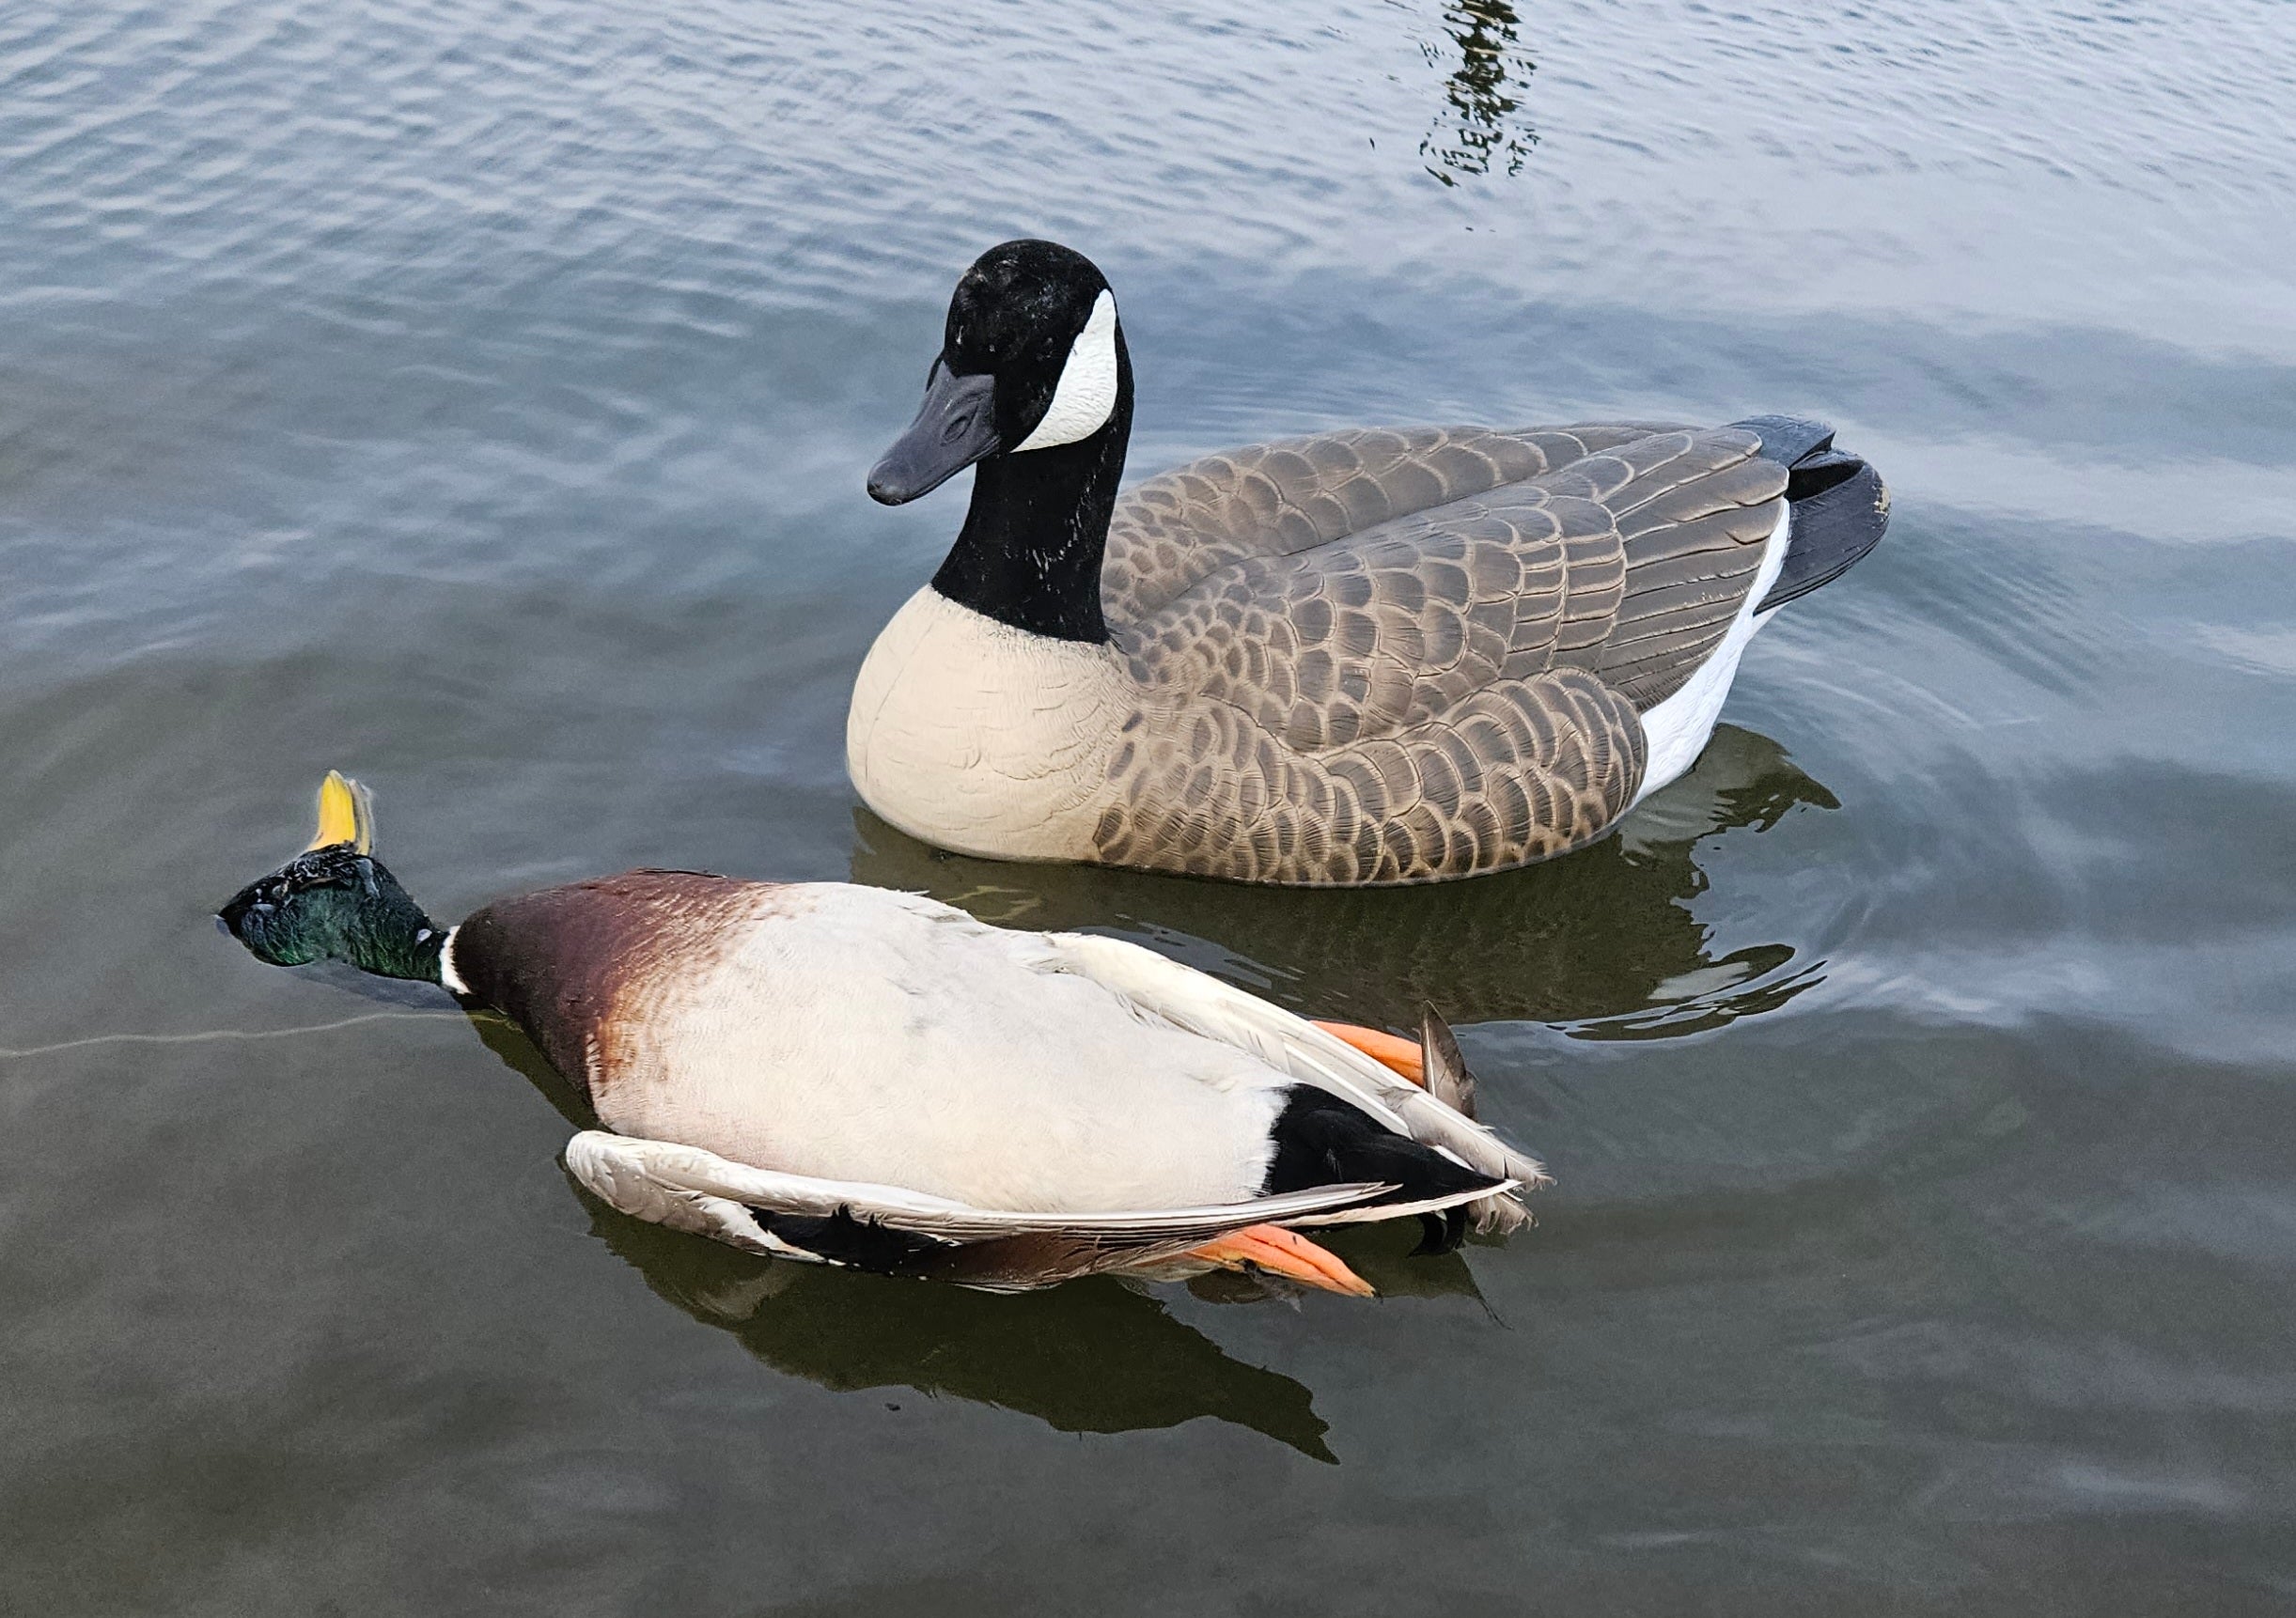 Goose floaters serve as confidence decoys for ducks and are an effective way to finish more puddle ducks over the spread.